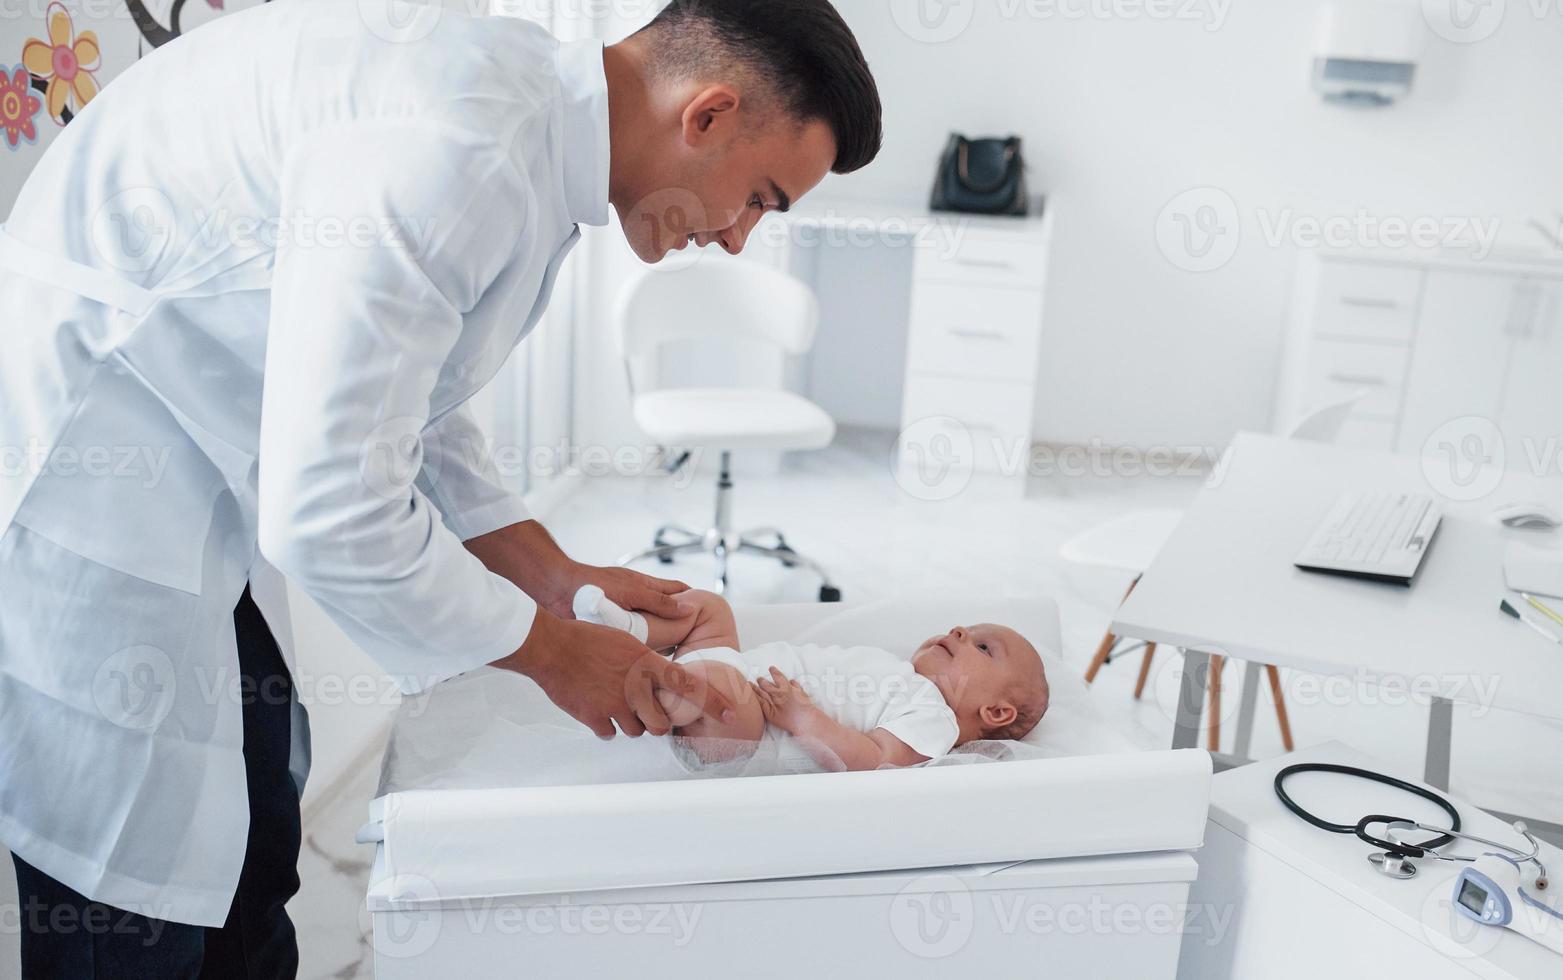 Young pediatrician is with little baby in the clinic at daytime photo